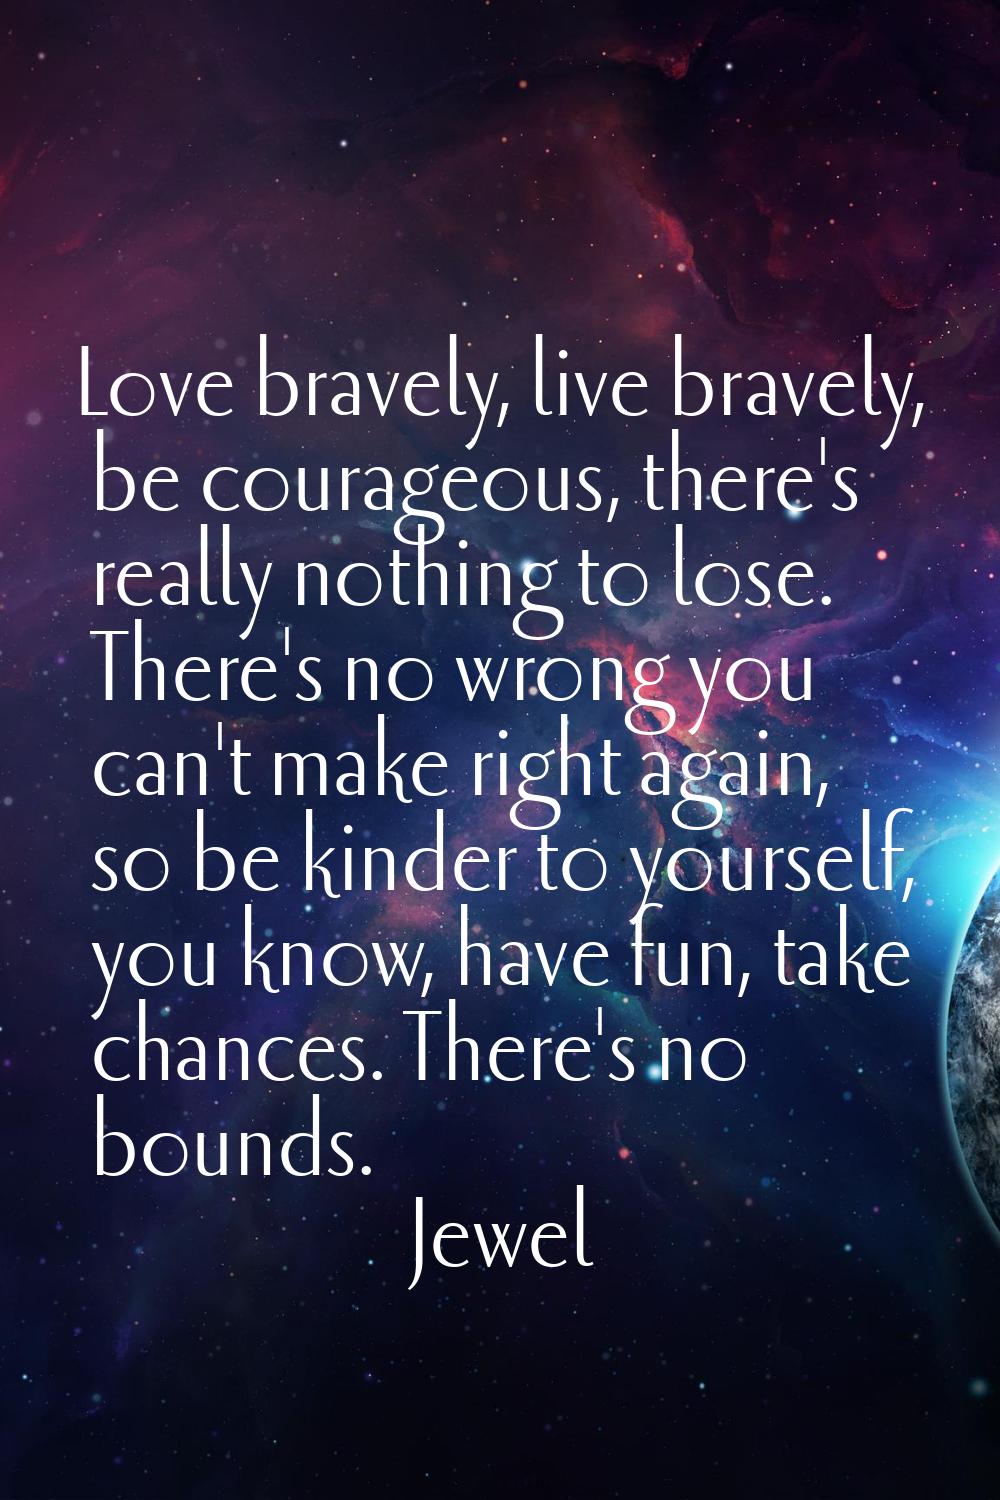 Love bravely, live bravely, be courageous, there's really nothing to lose. There's no wrong you can